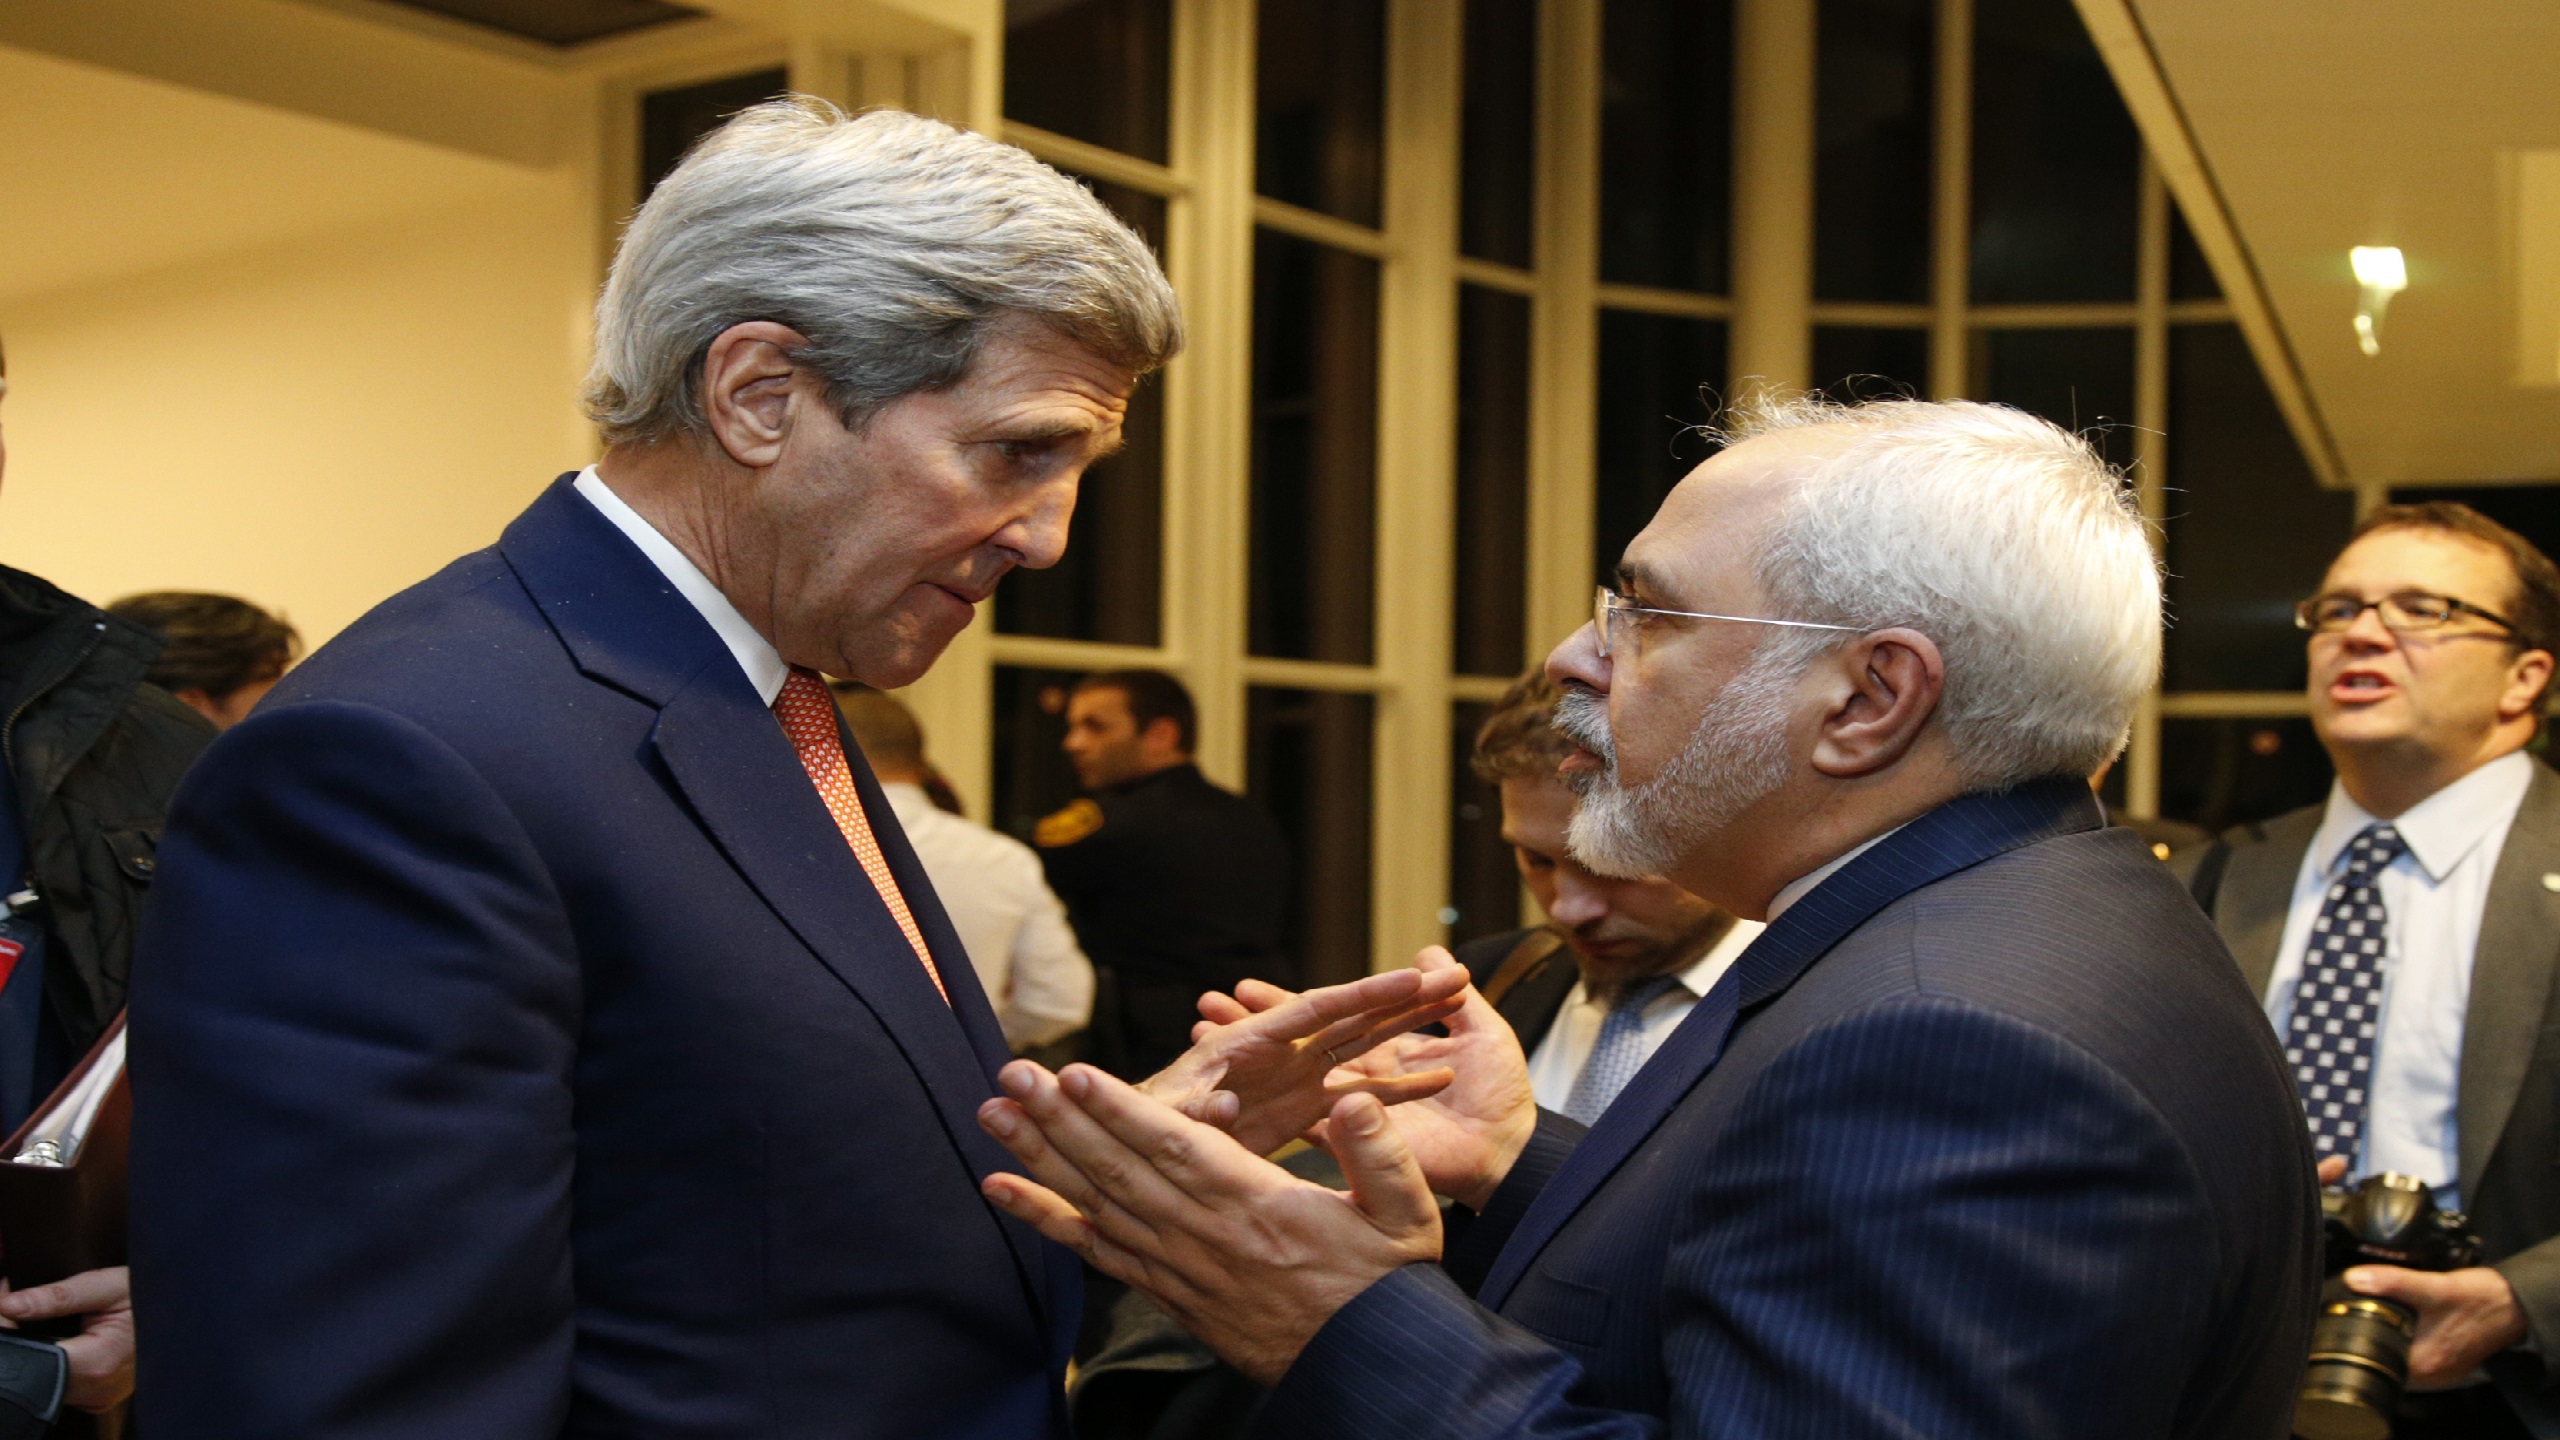 Kerry-Zarif Controversy Appears to Flame Out